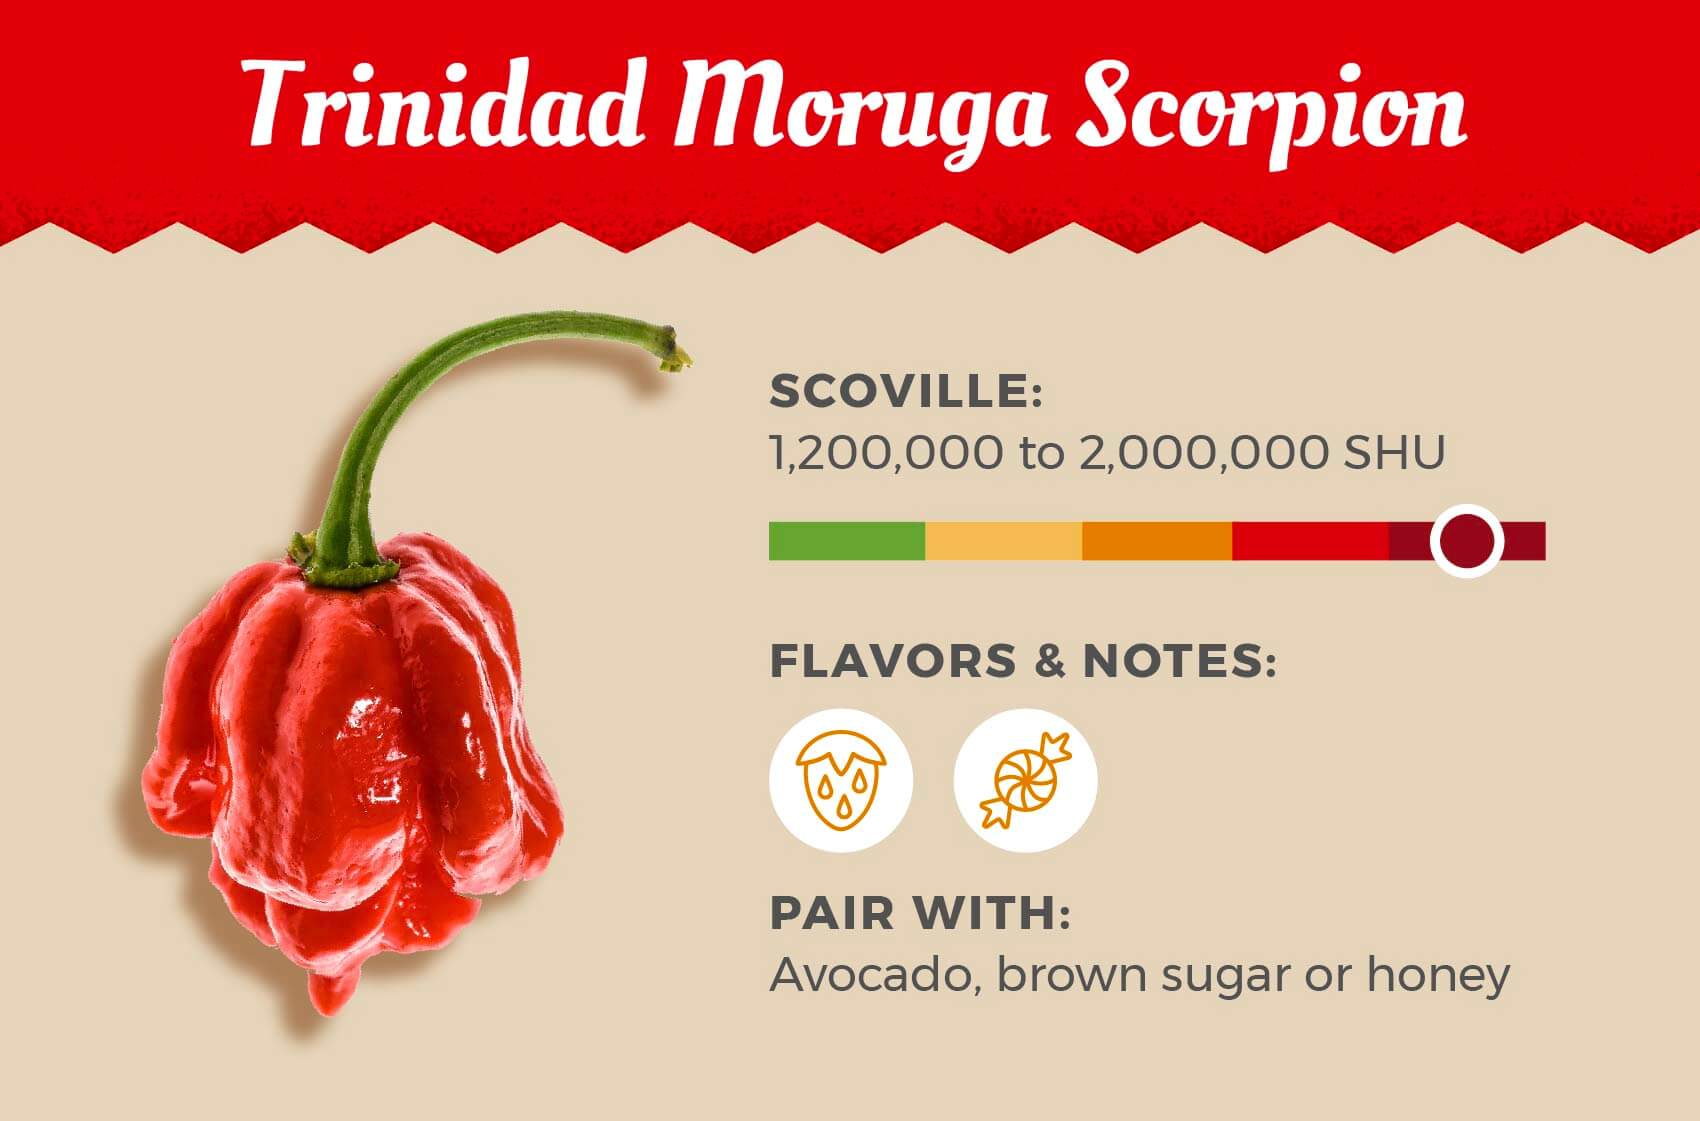 Carolina reaper is the number 1 hottest pepper on this list with a high scoville score of 2.2 million, pair it with cherries, mango or honey.